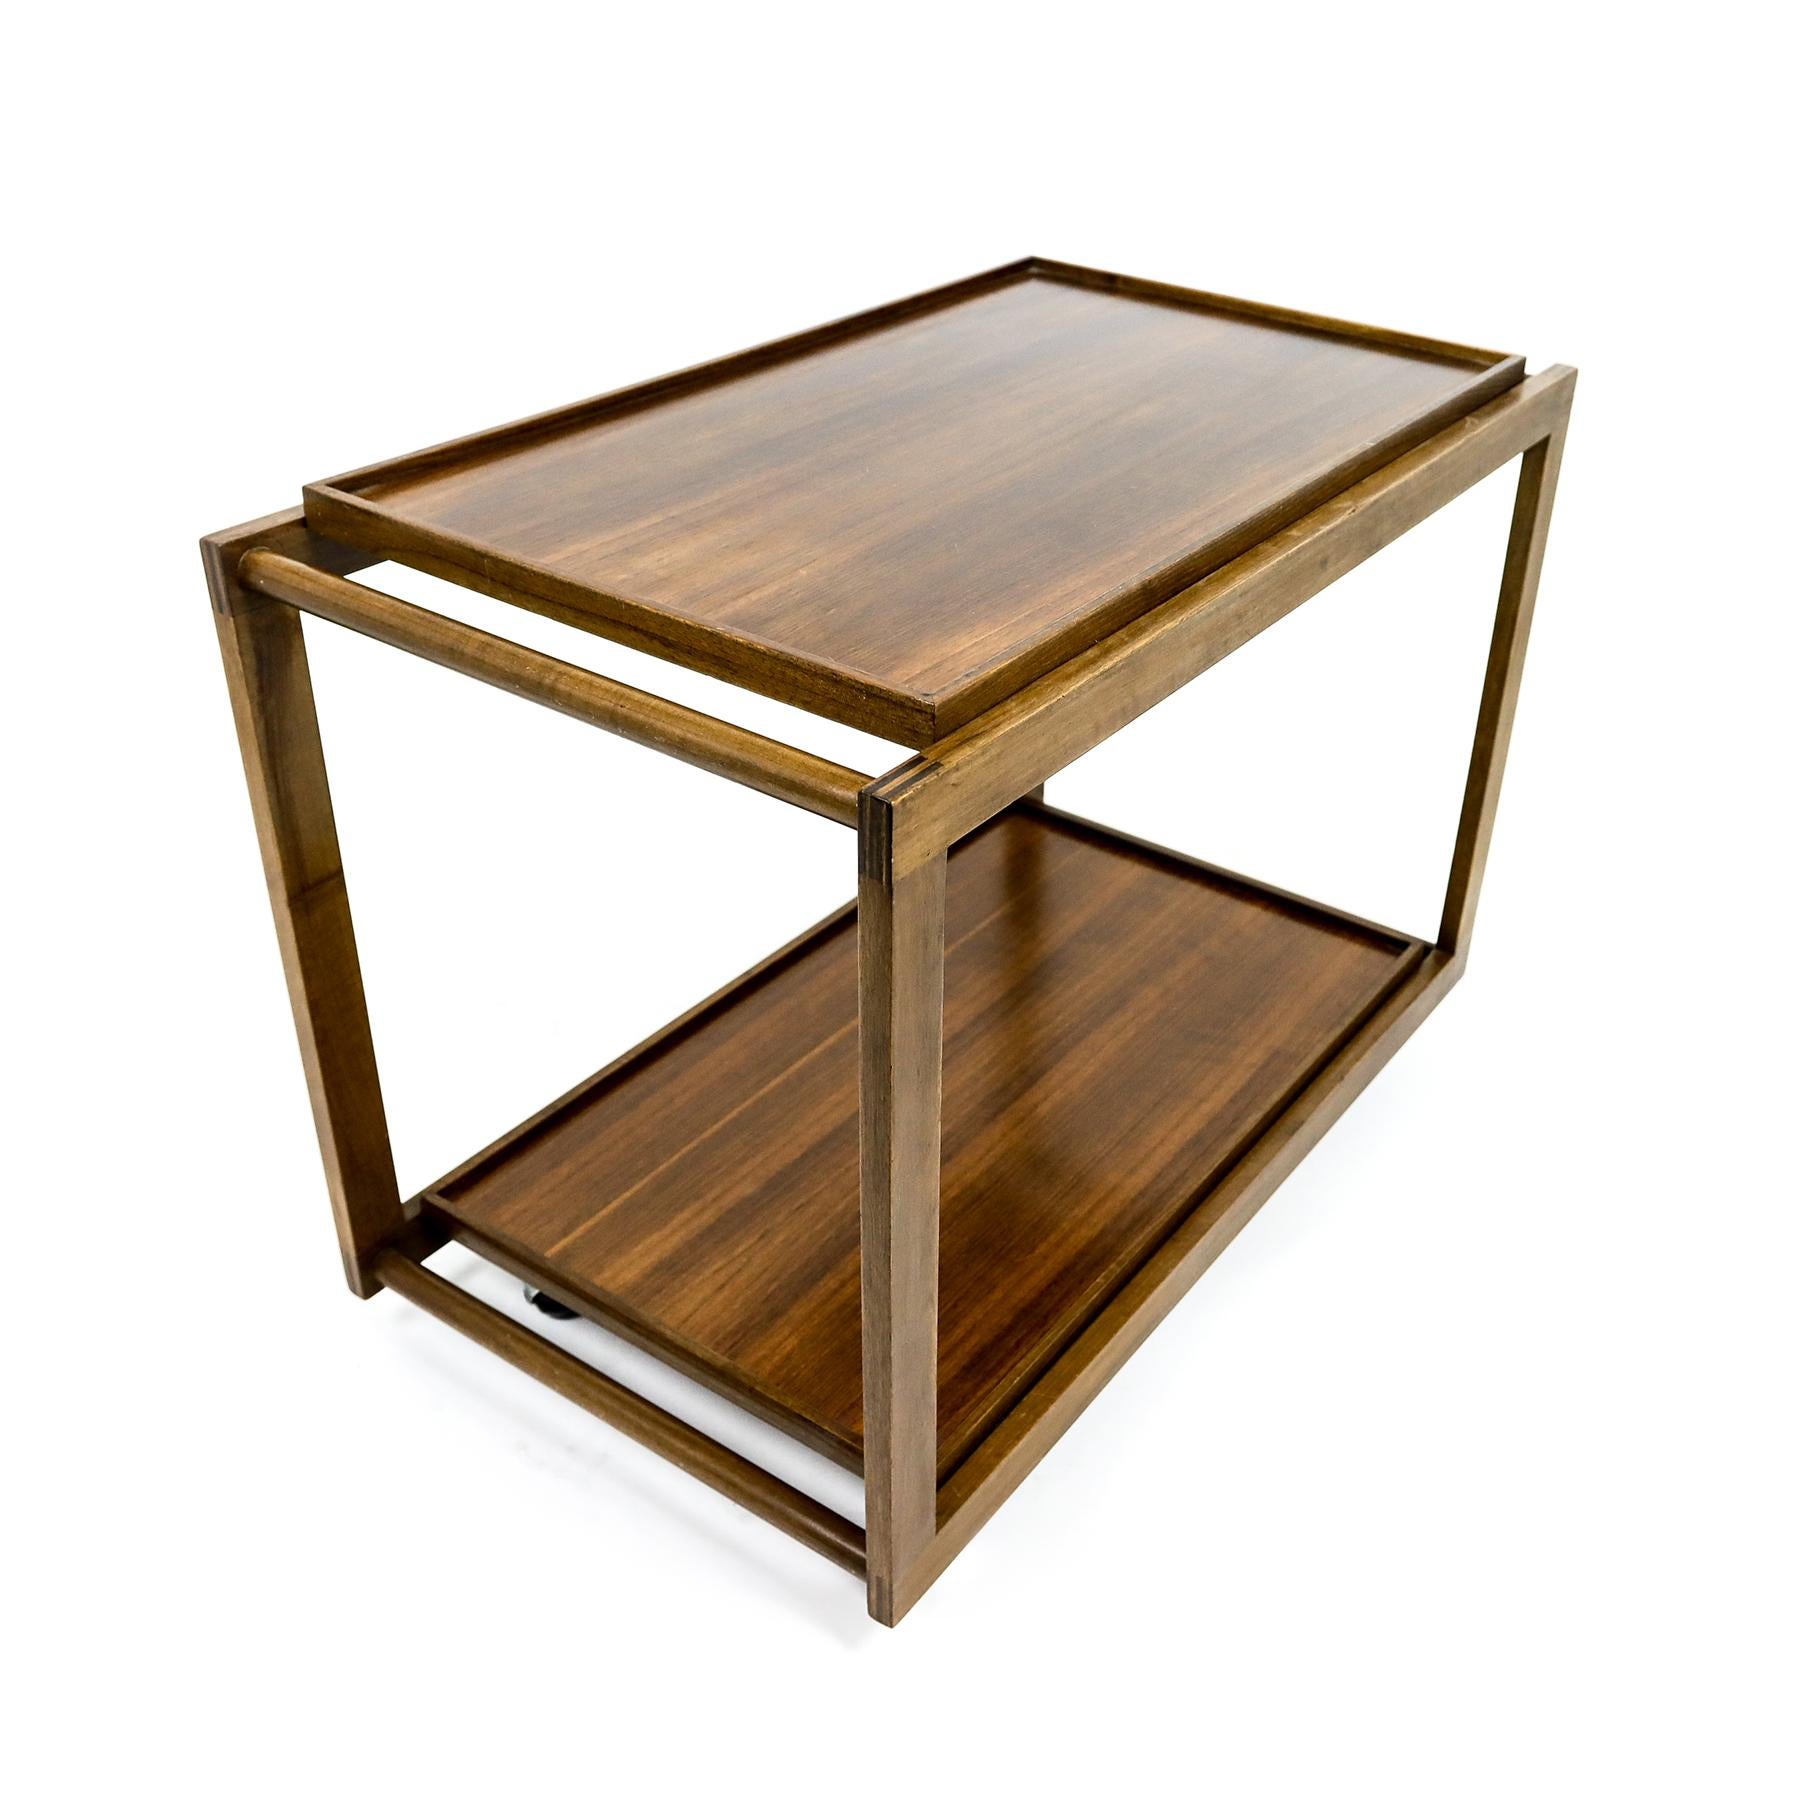 Mid century walnut bar cart, or serving trolley, by Gianfranco Frattini for Cassina with two removable solid wood trays.

Architect and designer Gianfranco Frattini was one of the most important Italian designers of the 20th Century. During his